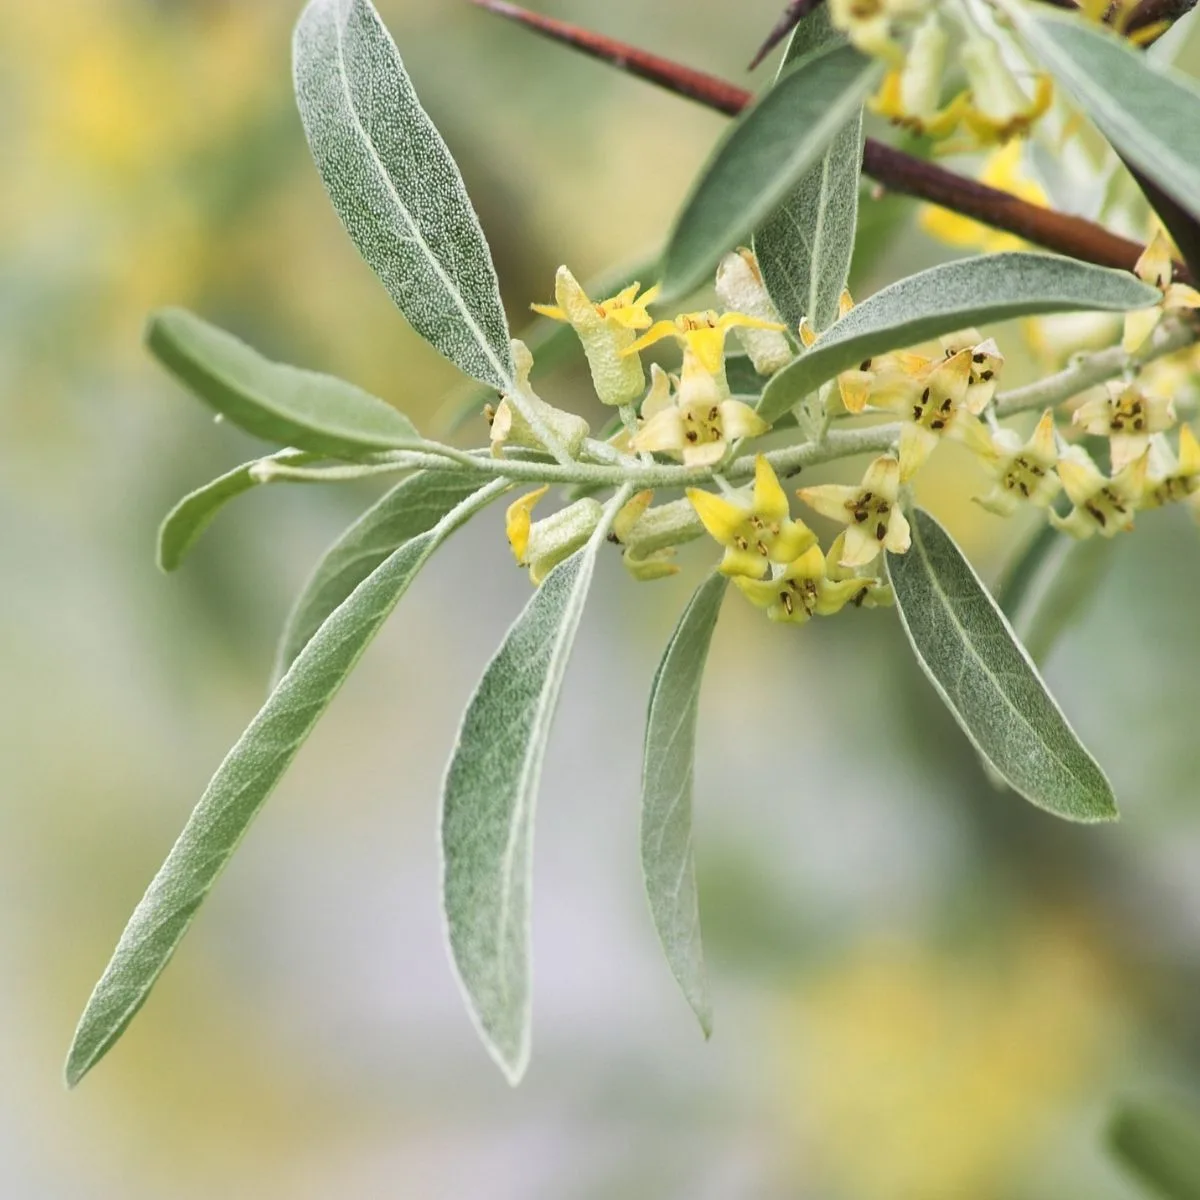 russian olive tree branch